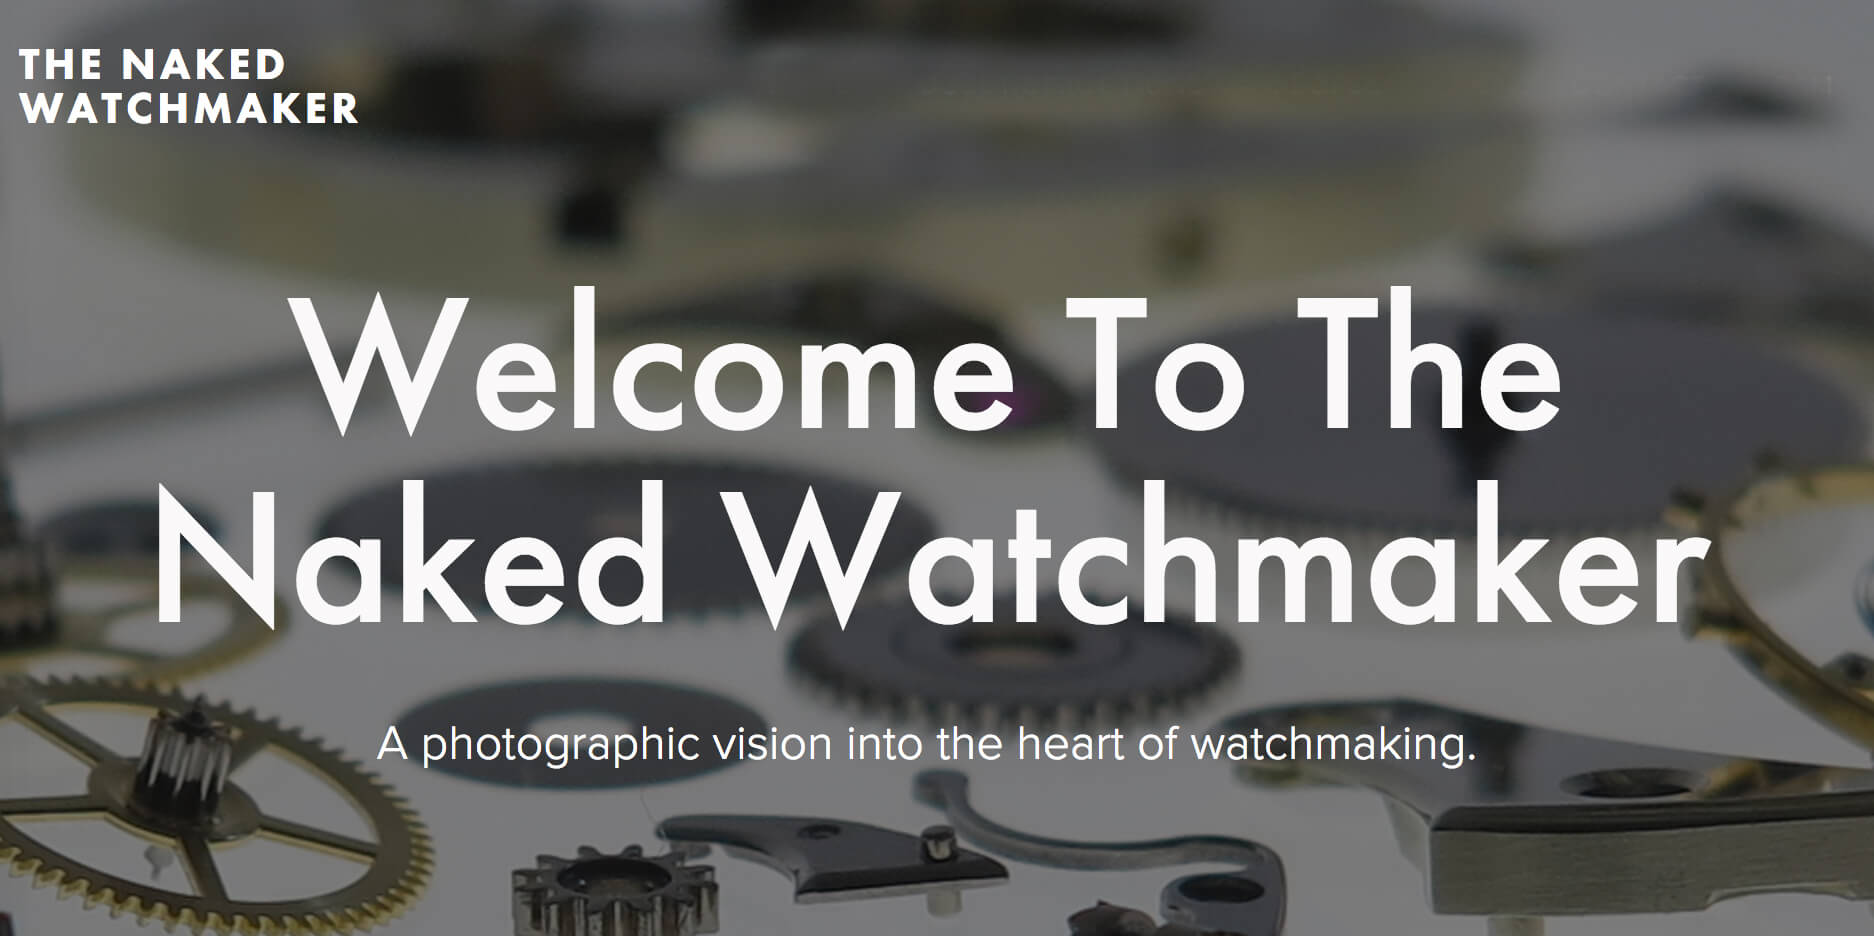 The Naked Watchmaker home page